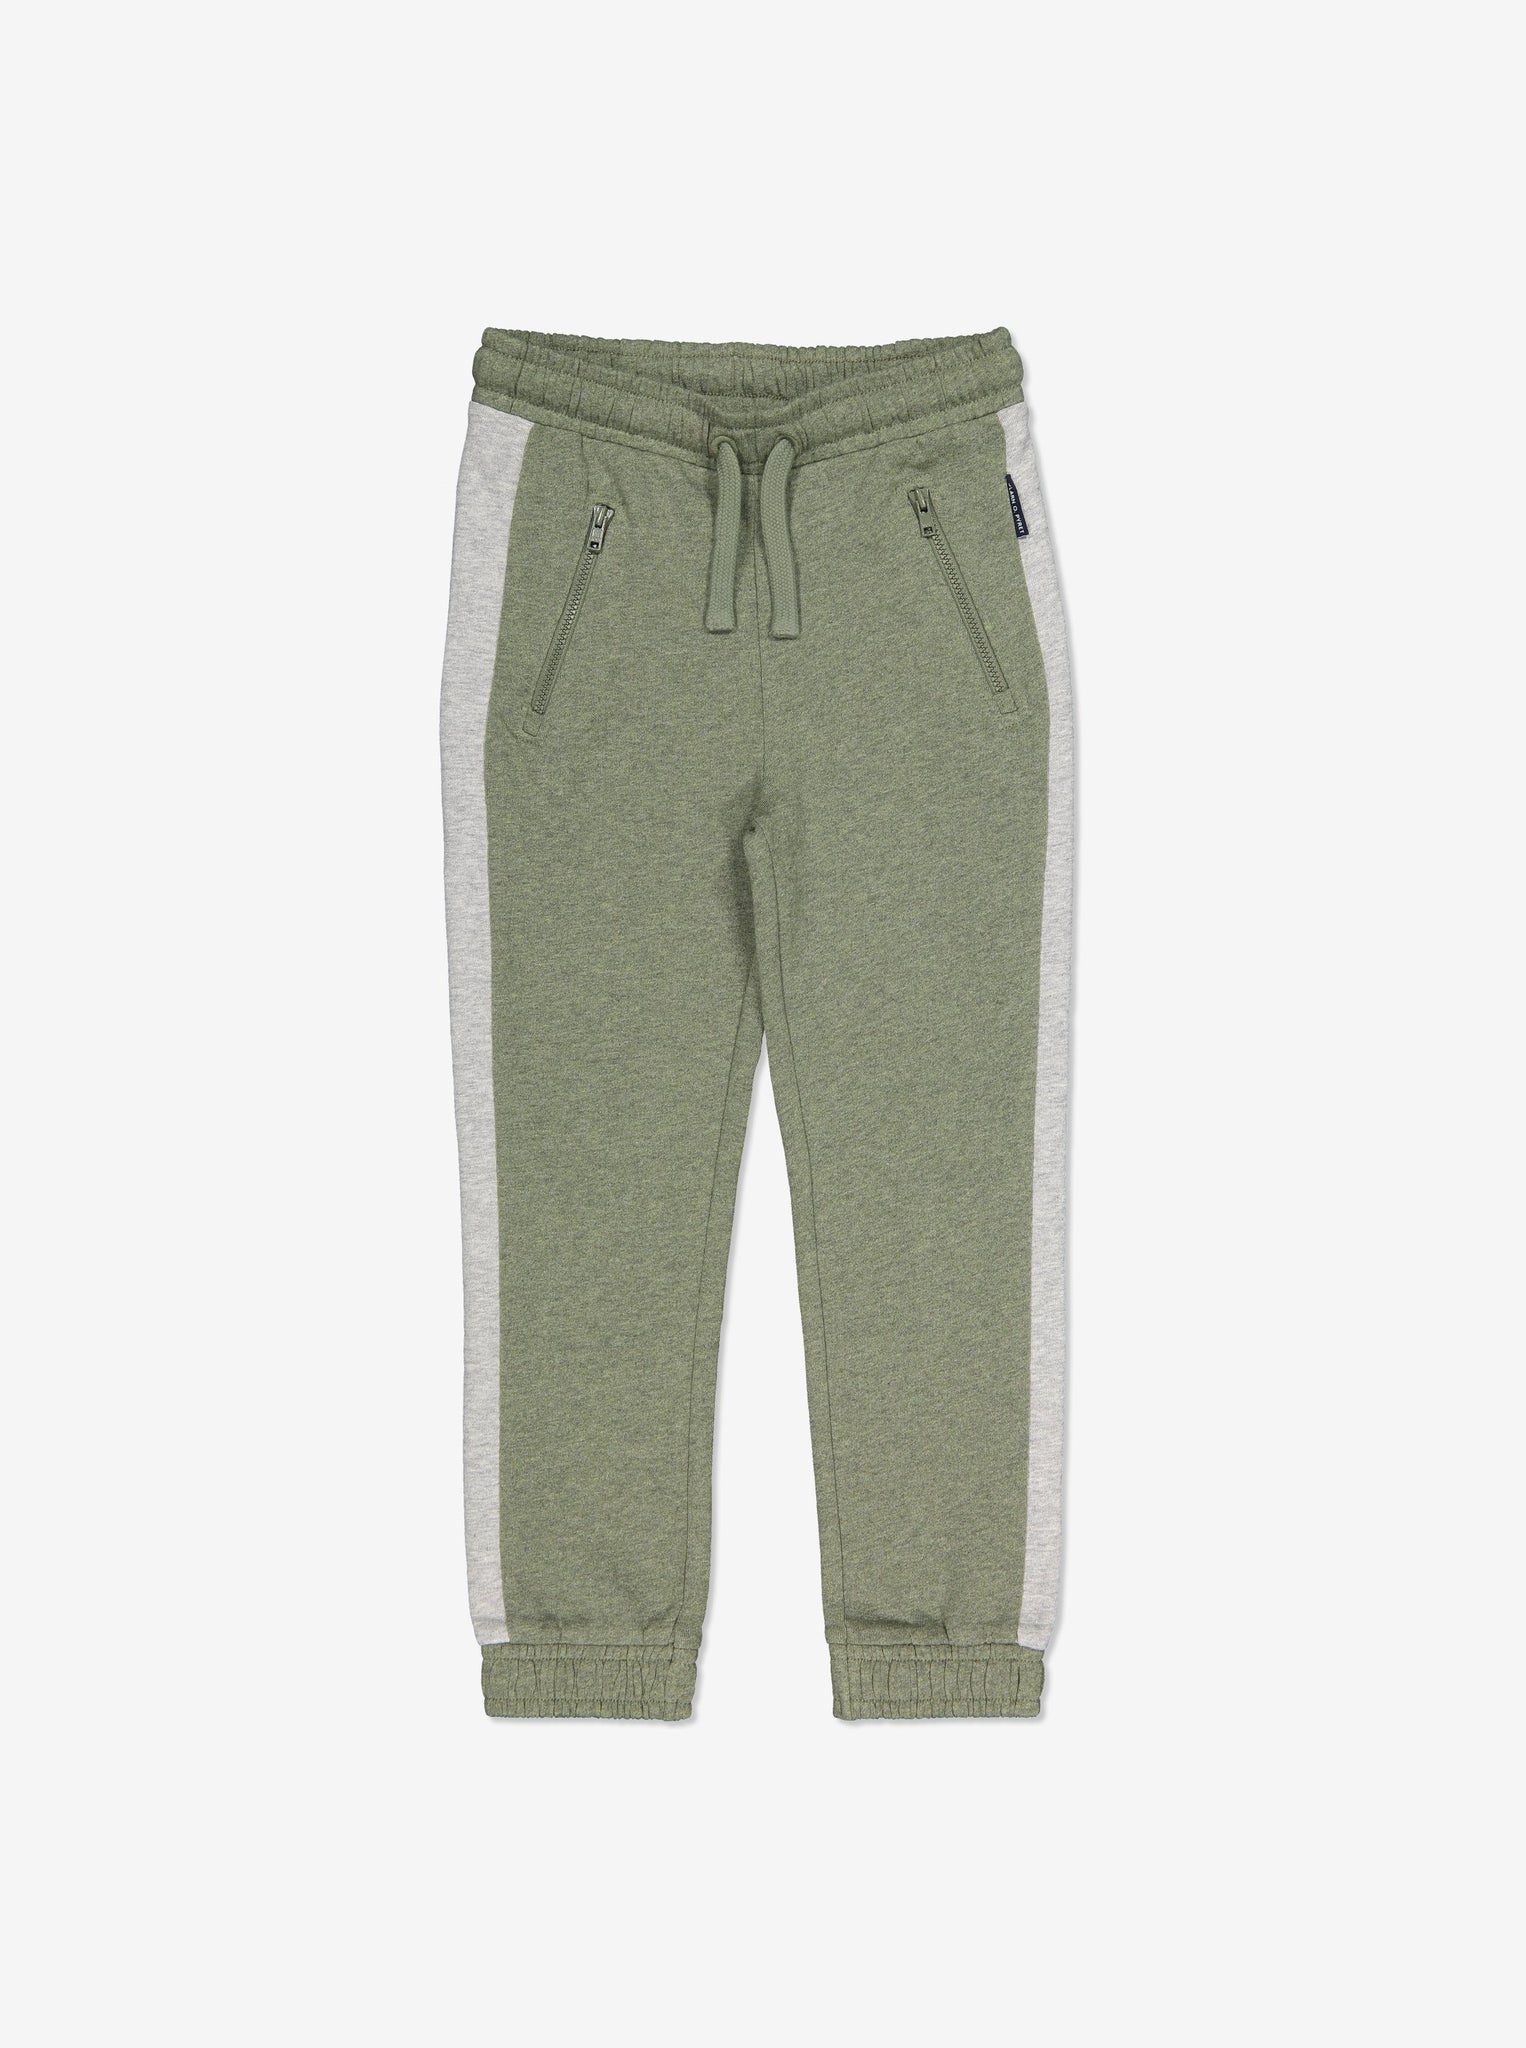 Two-Tone Kids Joggers-Unisex-1-6y-Green